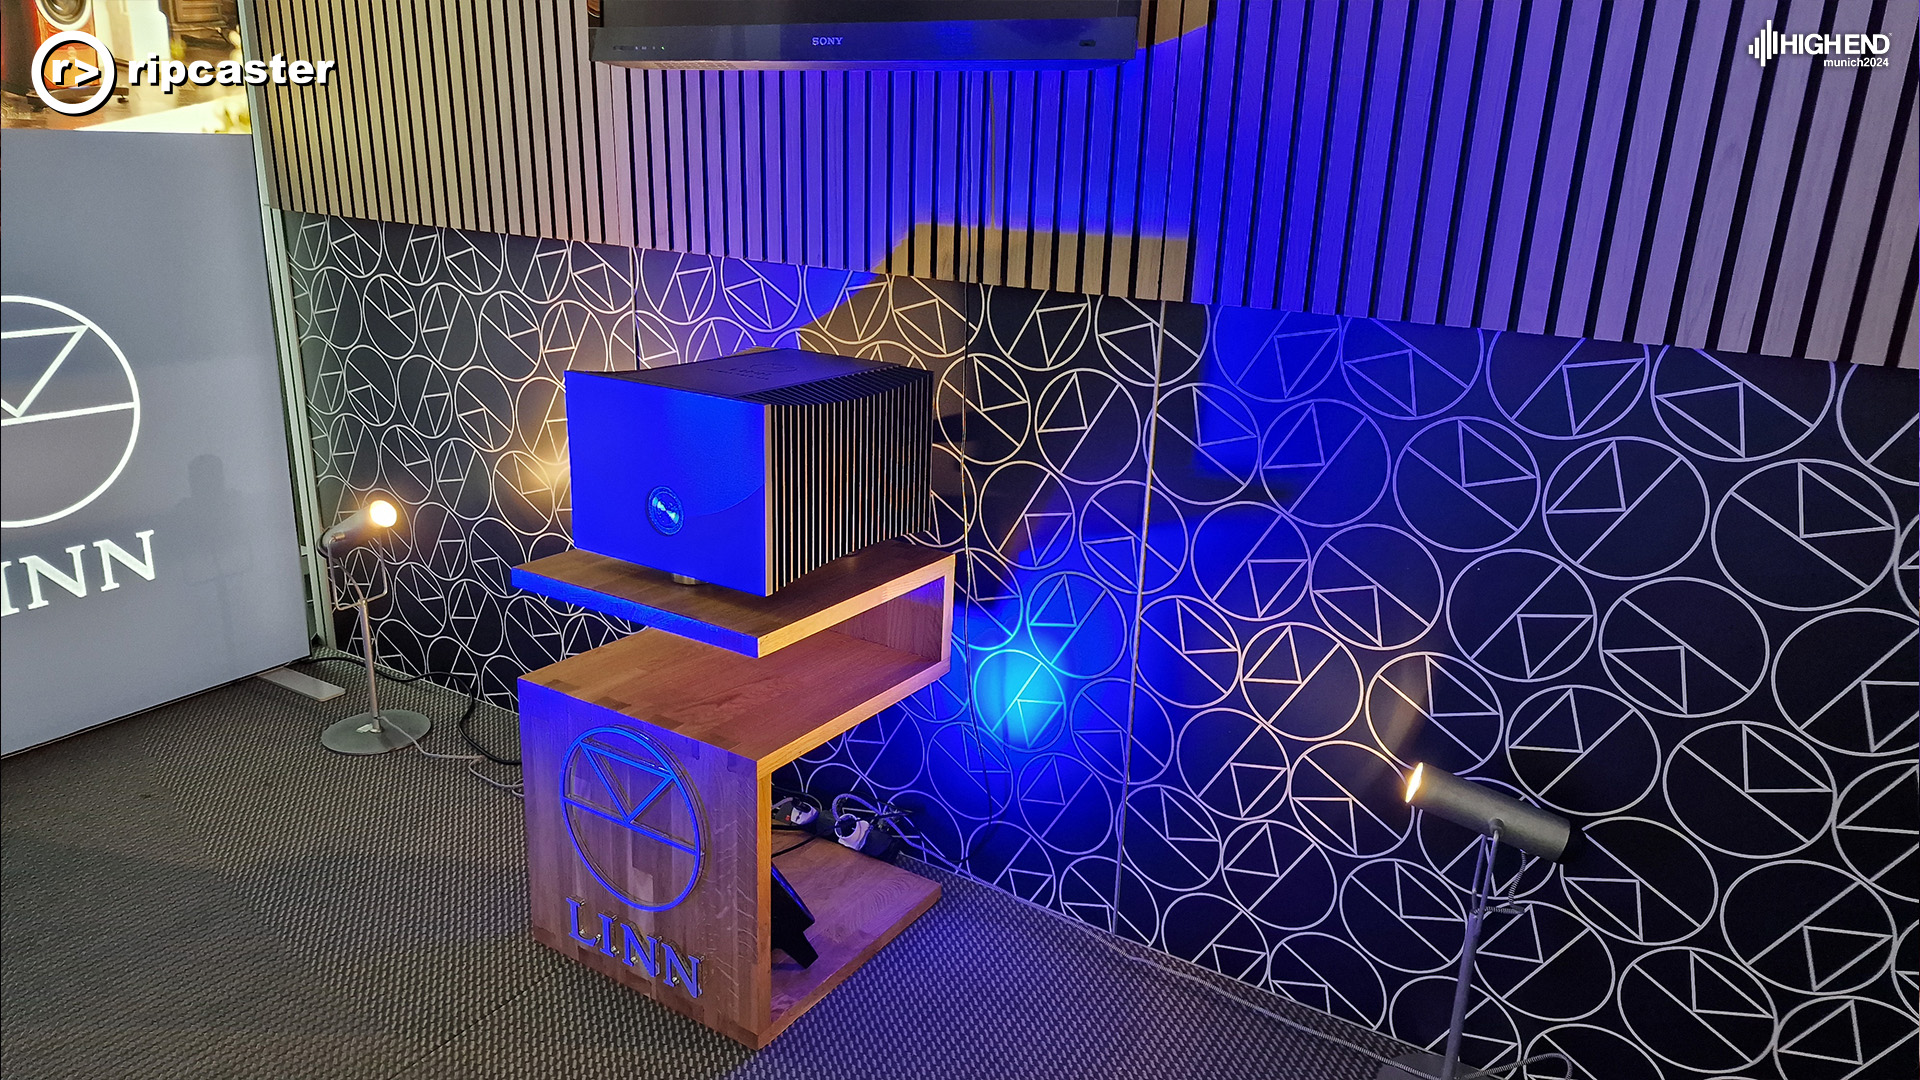 A Linn Klimax Solo 800 on a wooden stand in front of a backdrop of many Linn logos and a Linn sign to the left.  The Klimax Solo 800 is a black rectangular box shape that reflects light (in this case a blue)